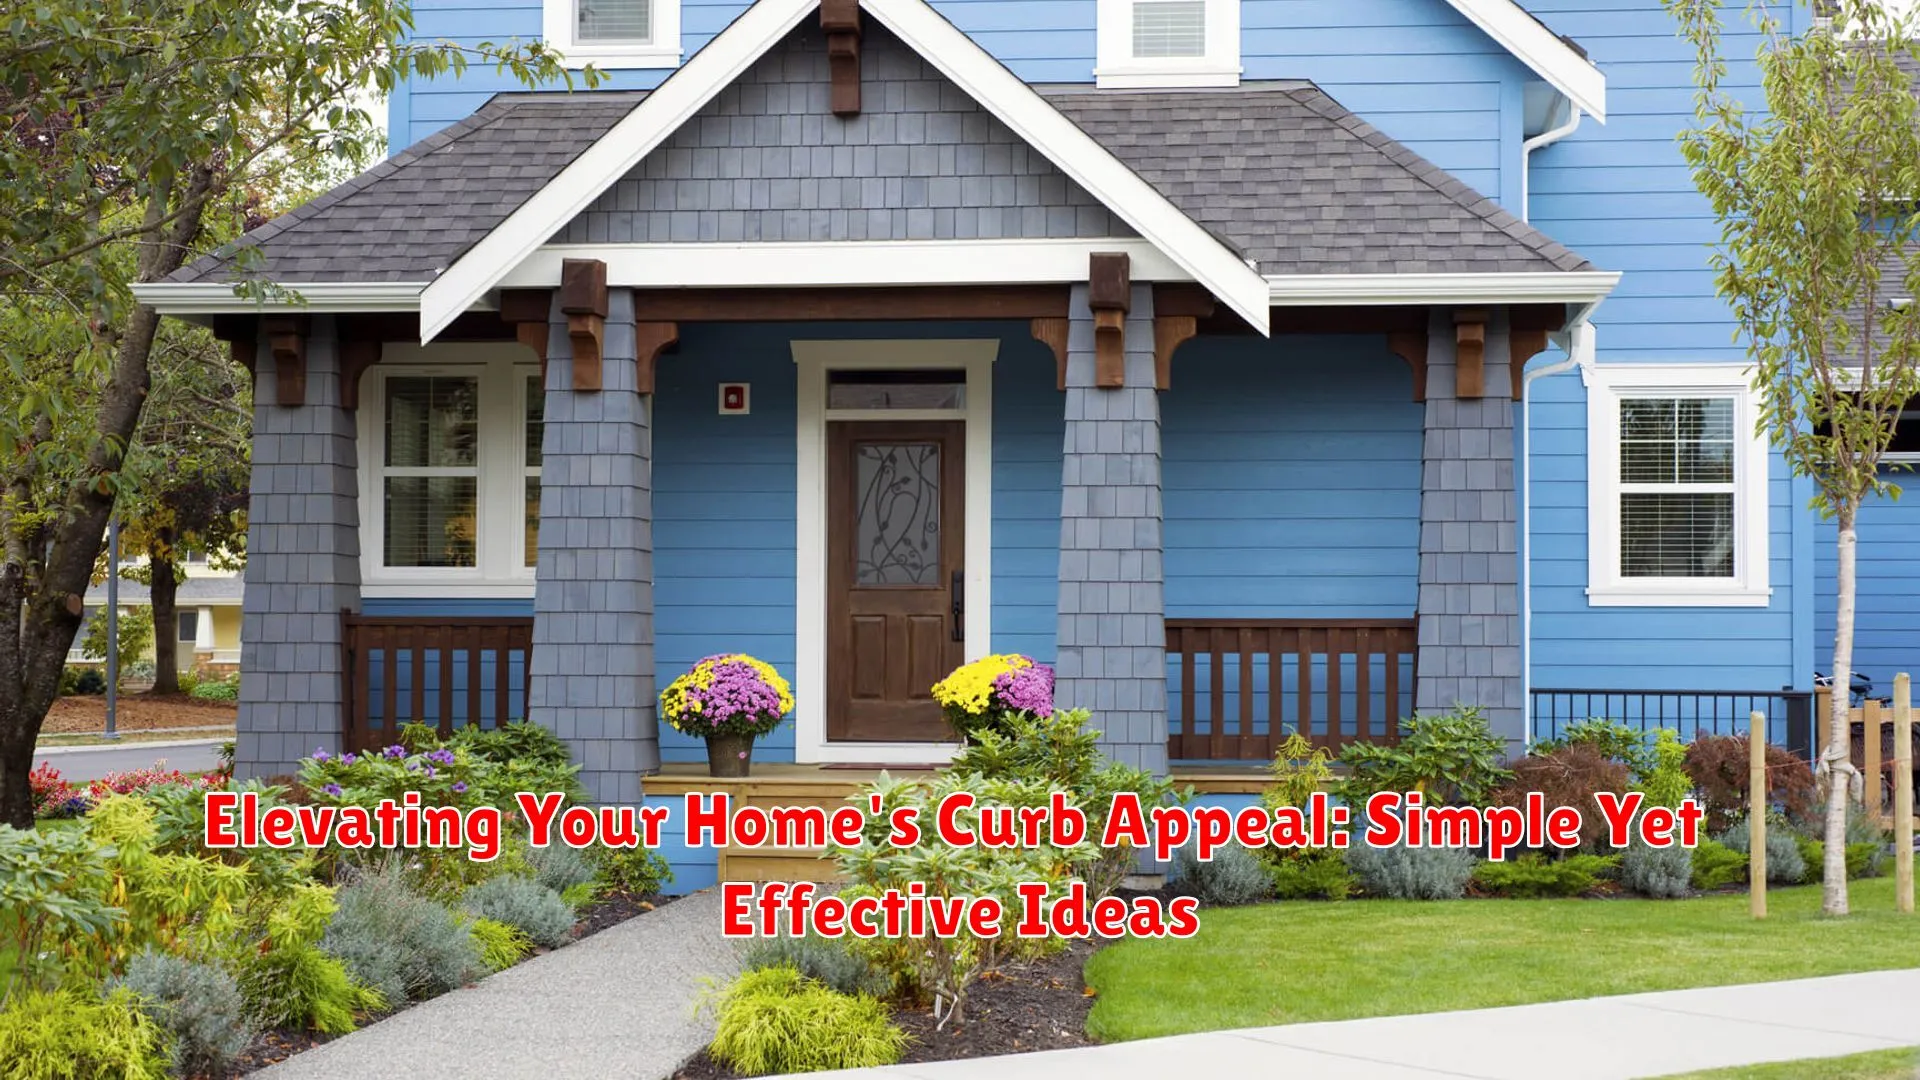 Elevating Your Home's Curb Appeal: Simple Yet Effective Ideas